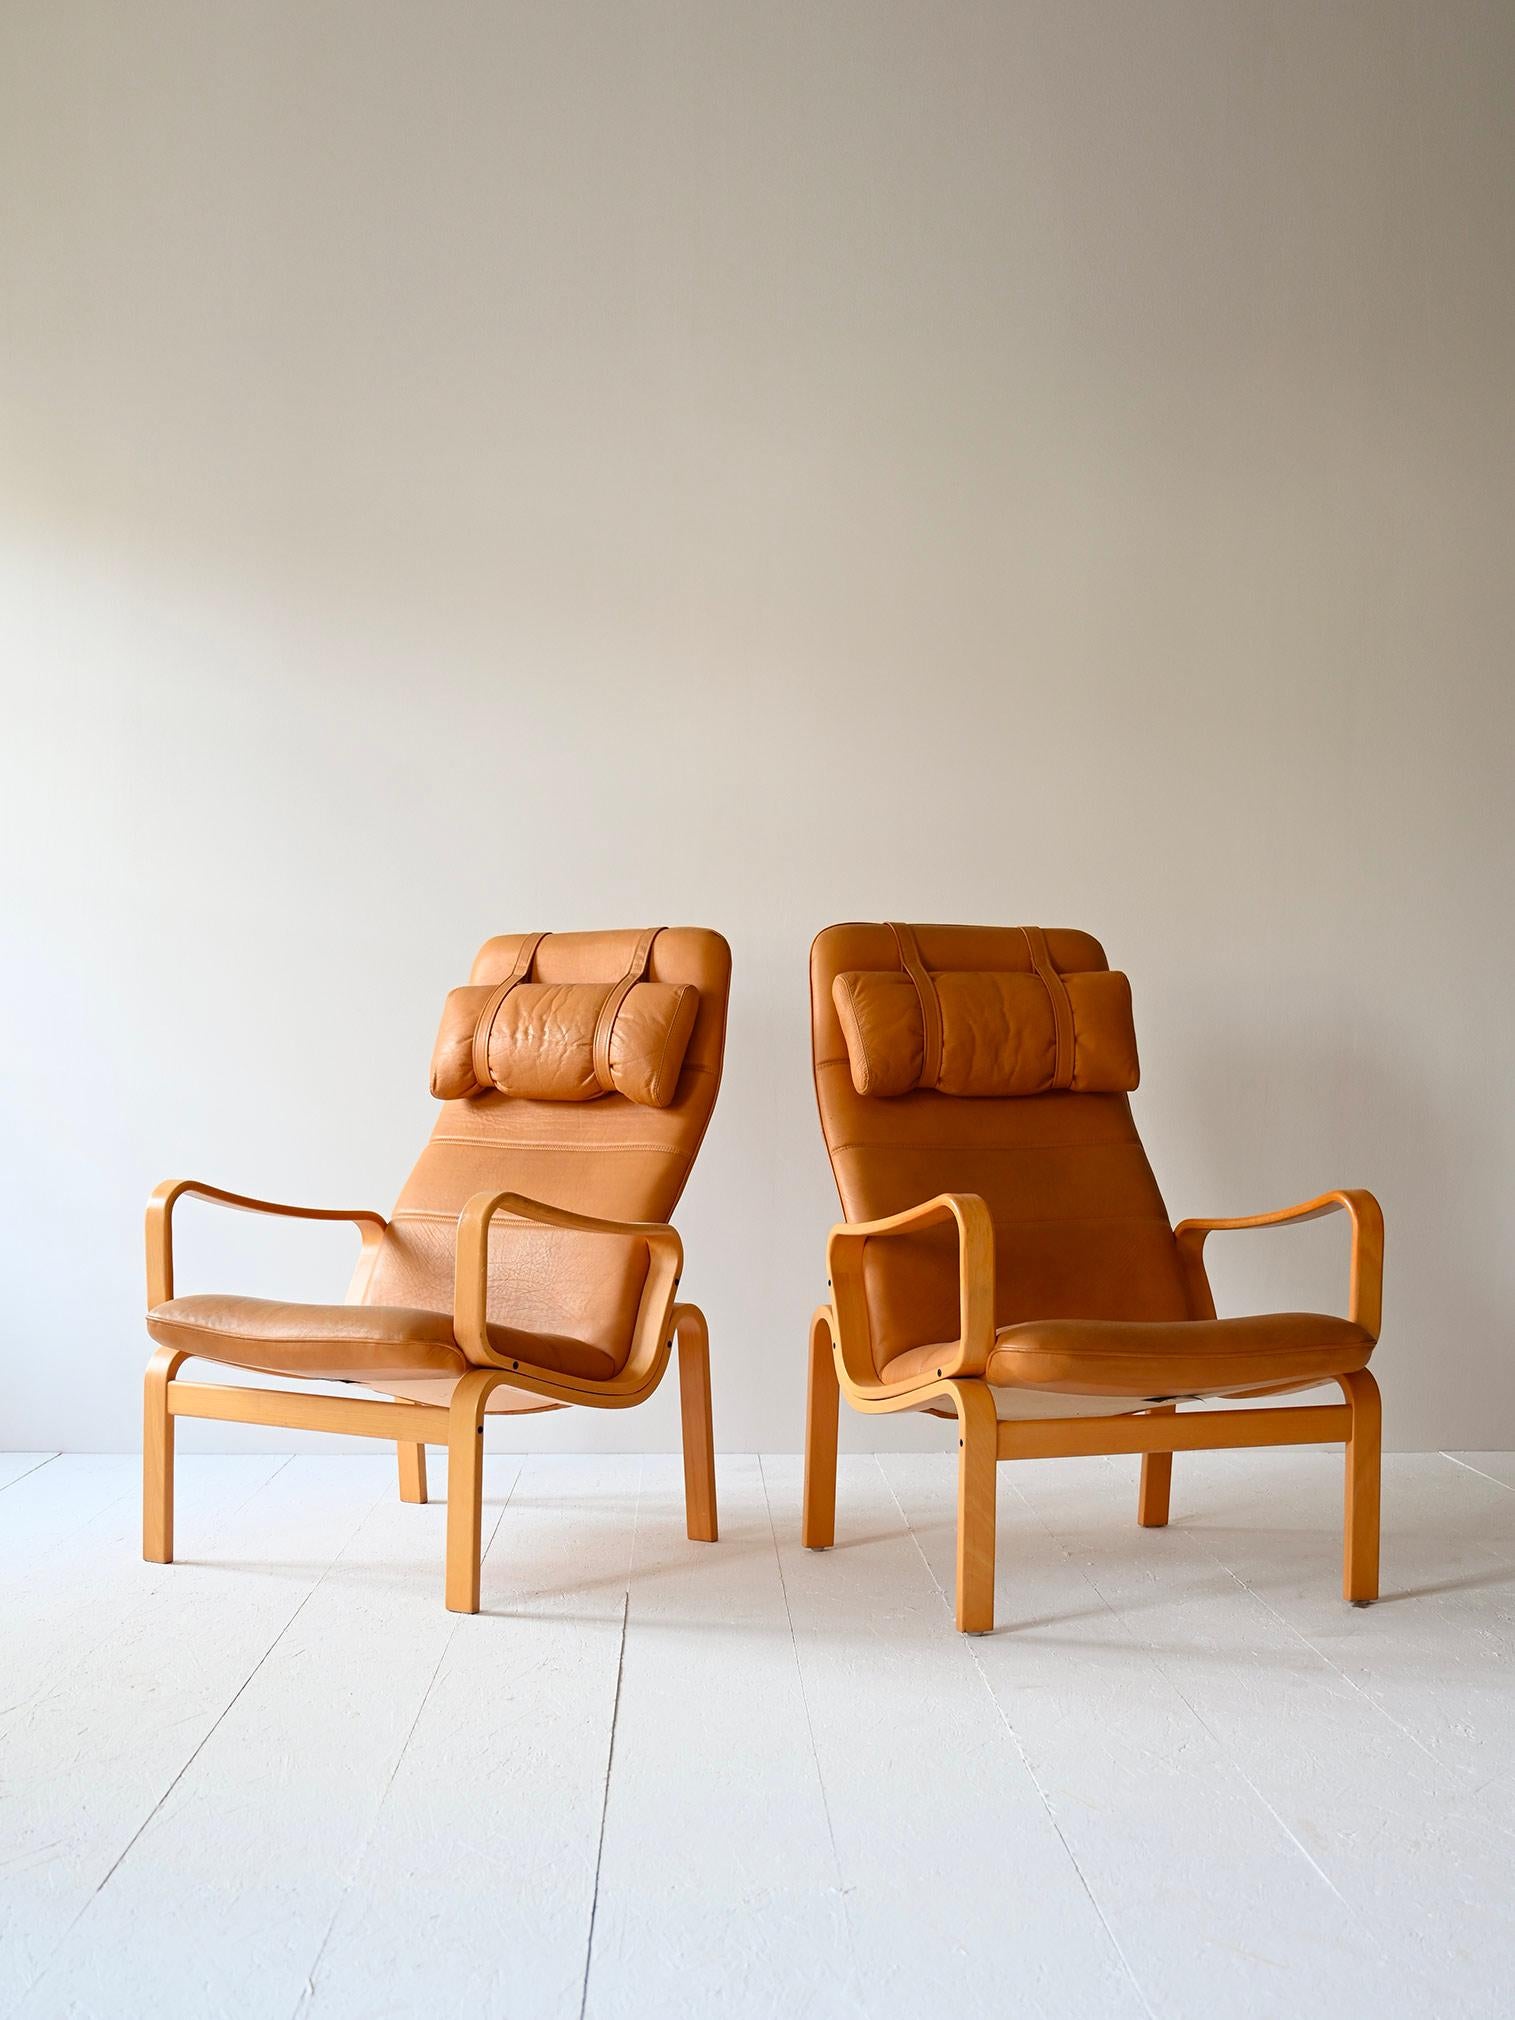 Pair of vintage 1980s chairs of Scandinavian manufacture.

These elegant and comfortable armchairs consist of a curved birch wood frame and an upholstered seat covered in beige leather. The sinuous shapes hark back to the organic design of